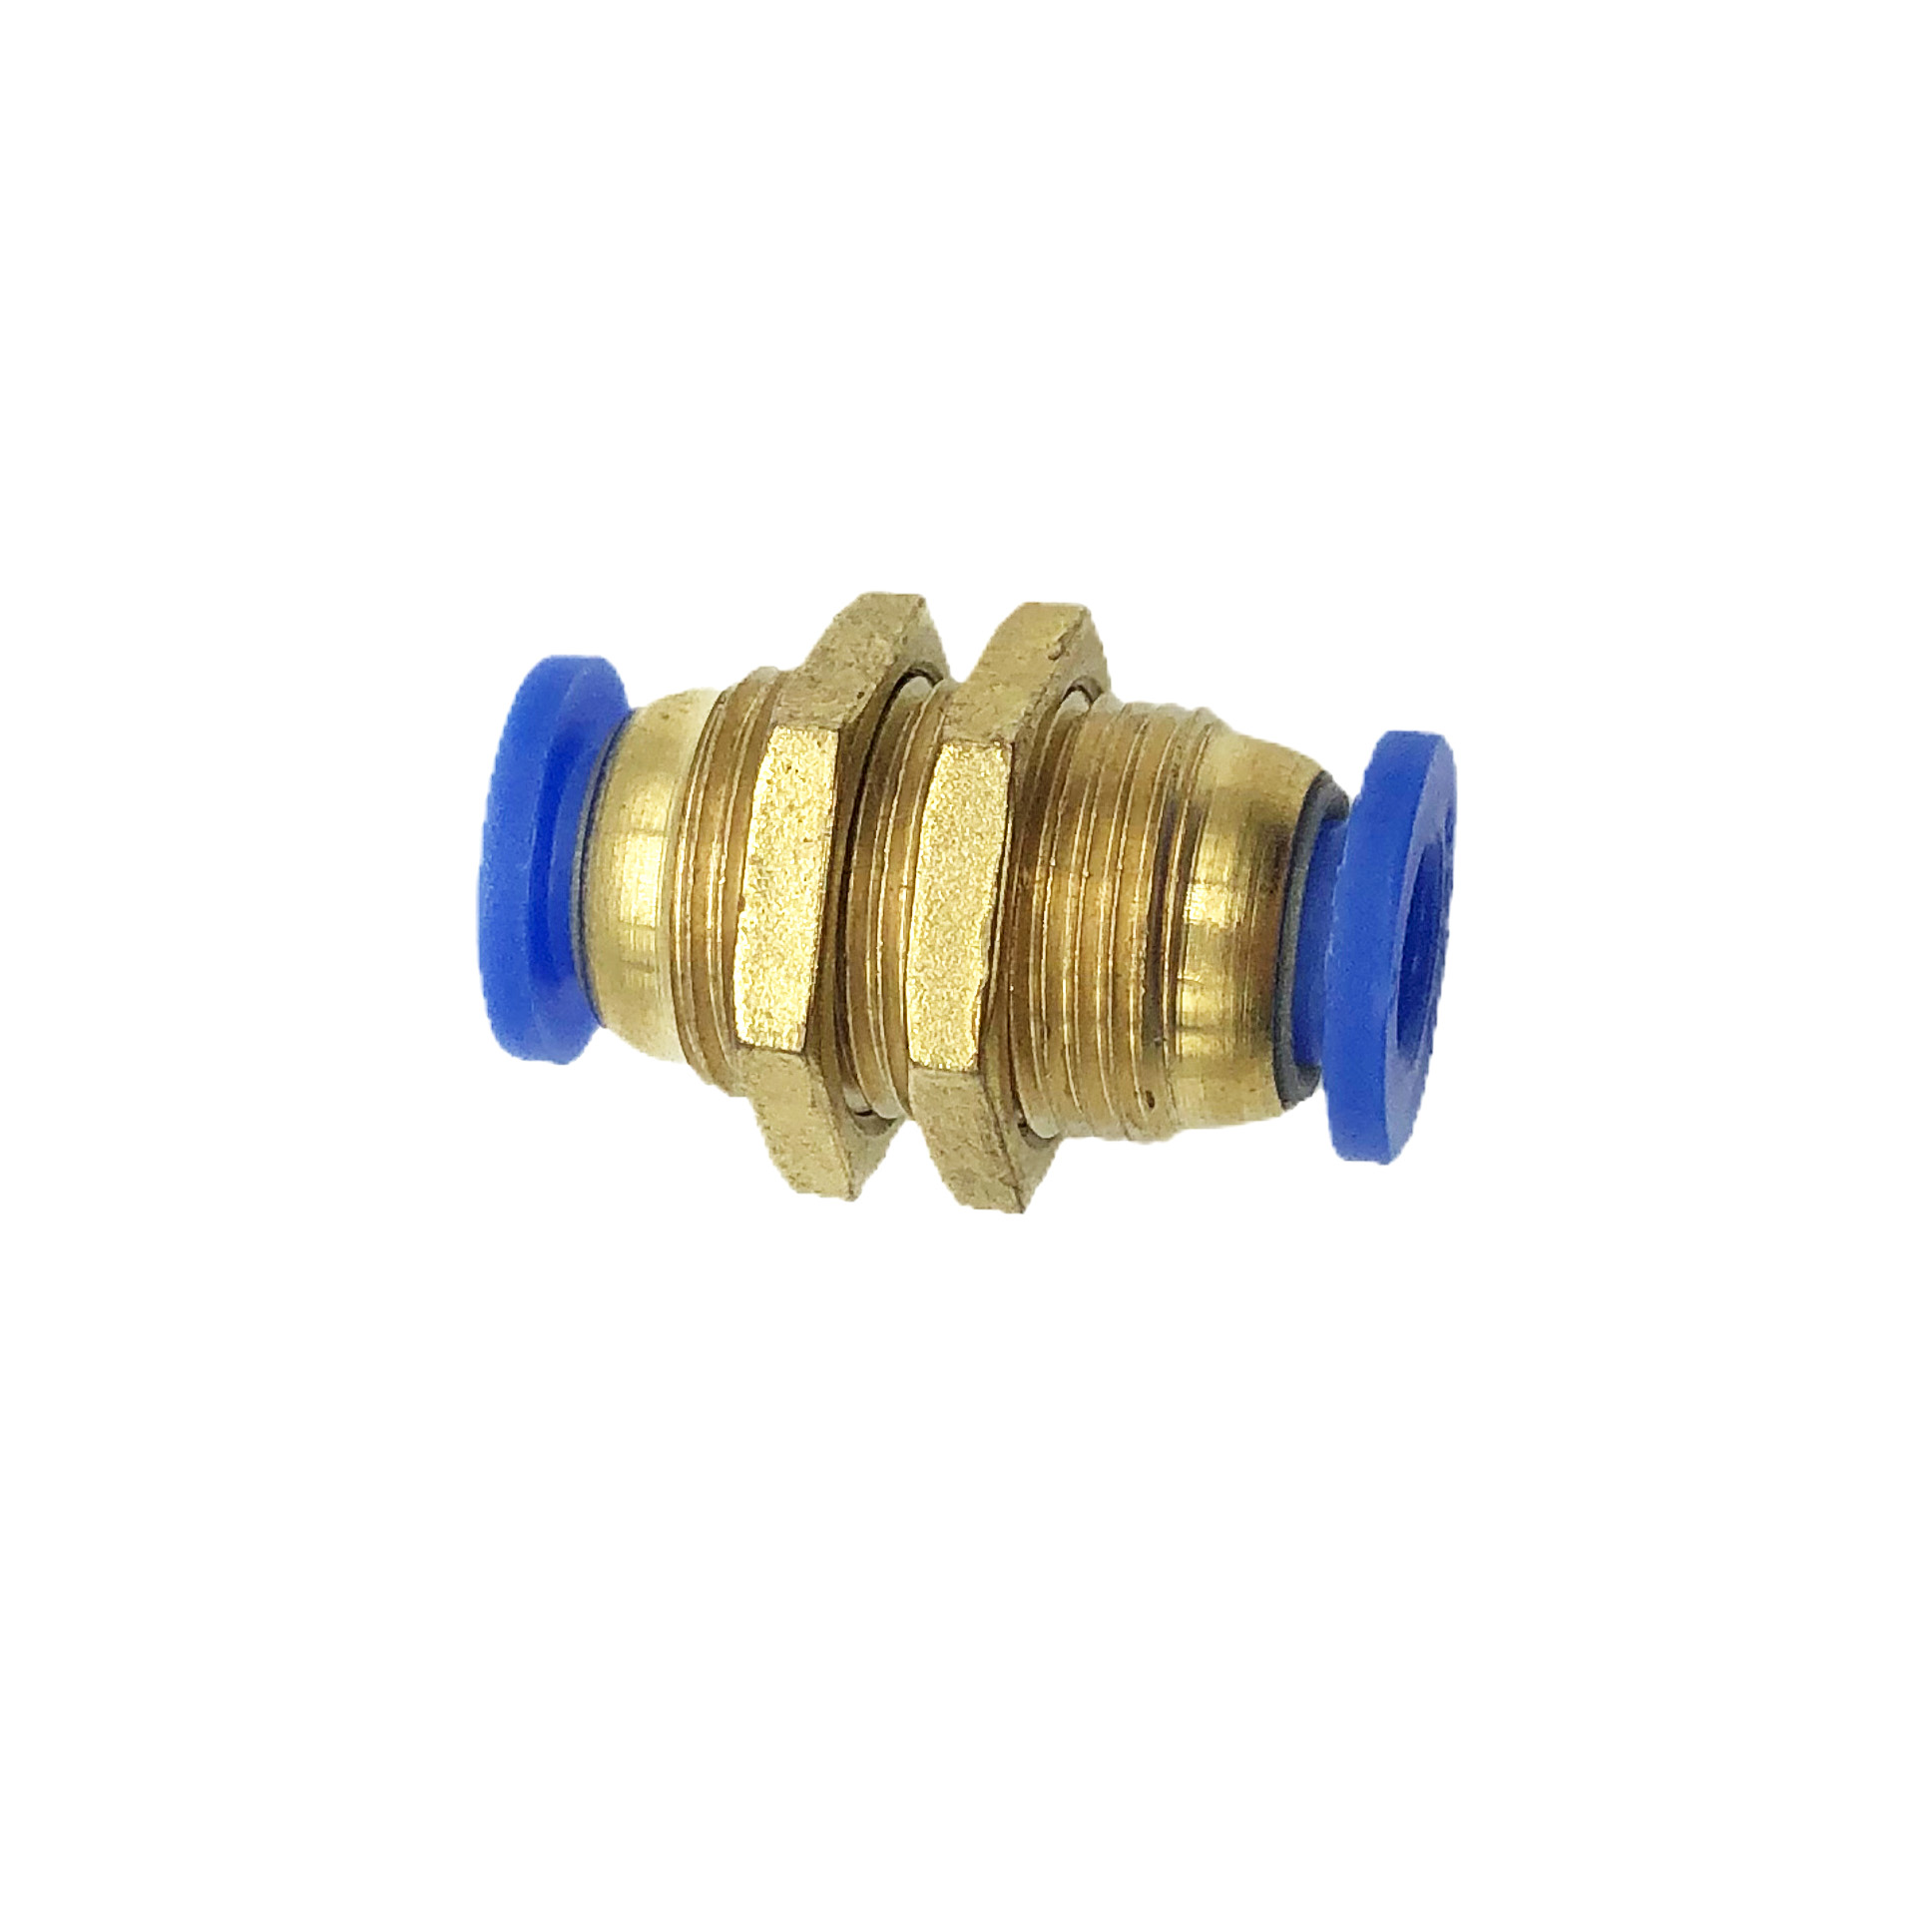 YUMO Gas Pipe Quick Insertion Quick Connector Through Plate Straight Bulkhead  Connector PM-6, China PM-6, Pneumatic Gas, bulkhead connector  Manufacturers, Suppliers, Price, Wholesale, Buy, China, Cheap, Company -  YUEQING YUMO ELECTRIC CO.,LTD